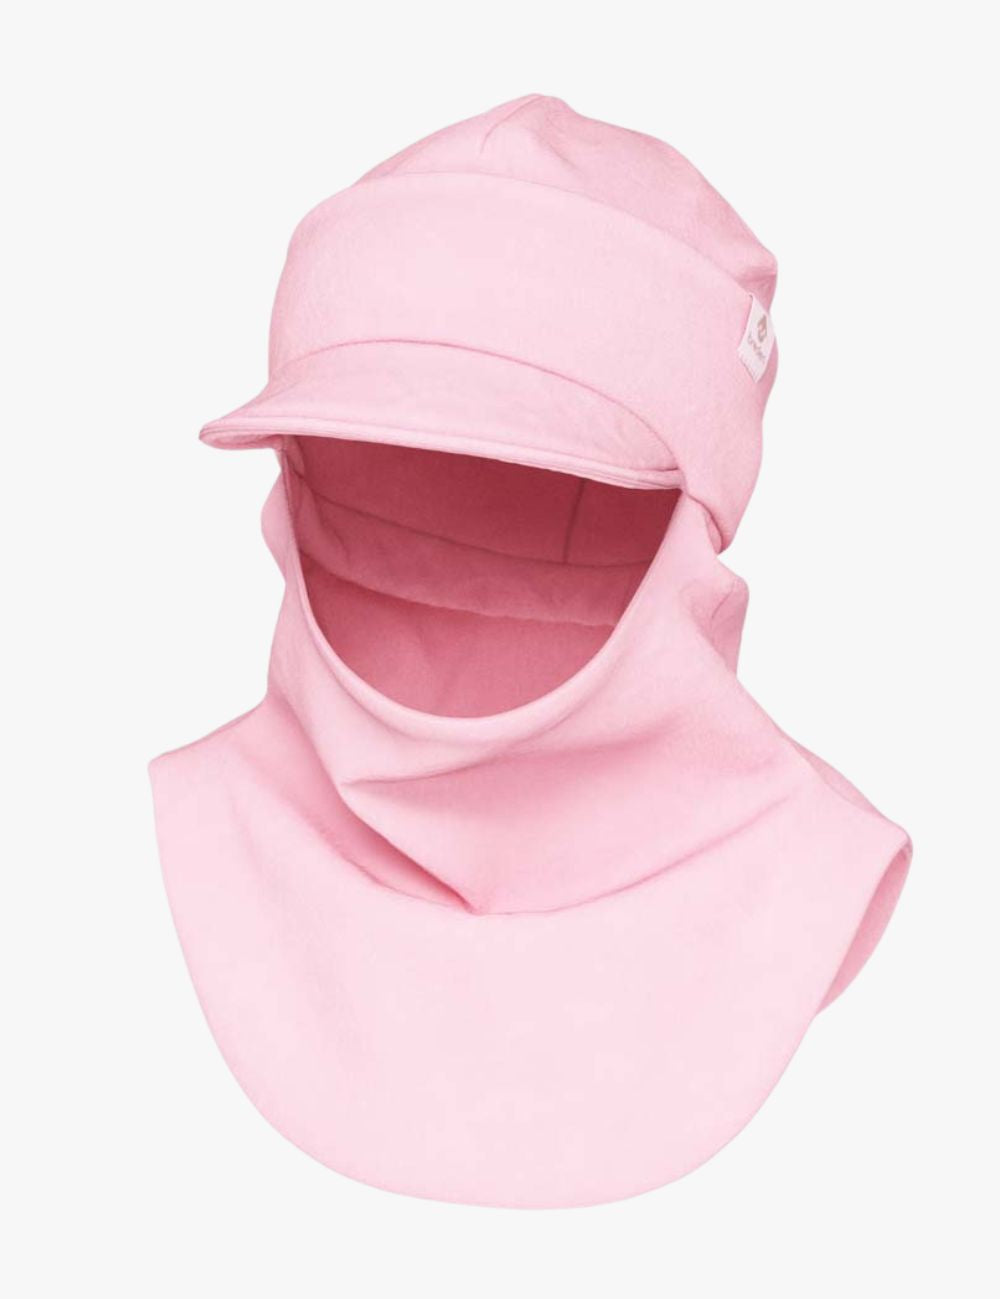 Peaked Spring-Fall Balaclava For Kids BENT